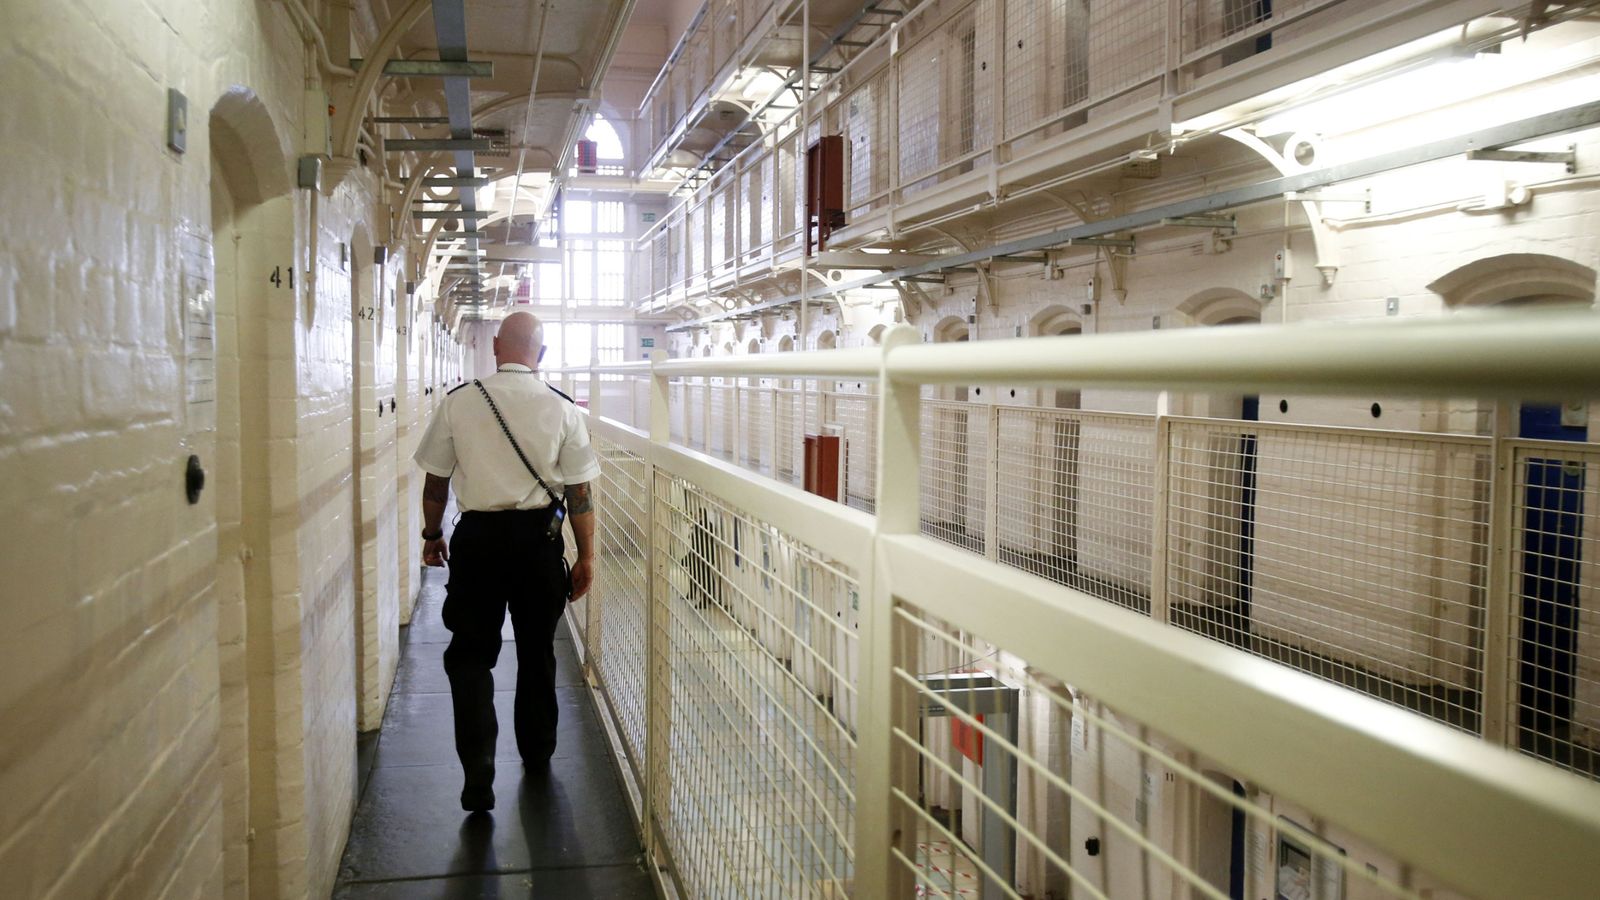 Prisoners to be released after serving 40% of sentence to alleviate overcrowding | Politics News